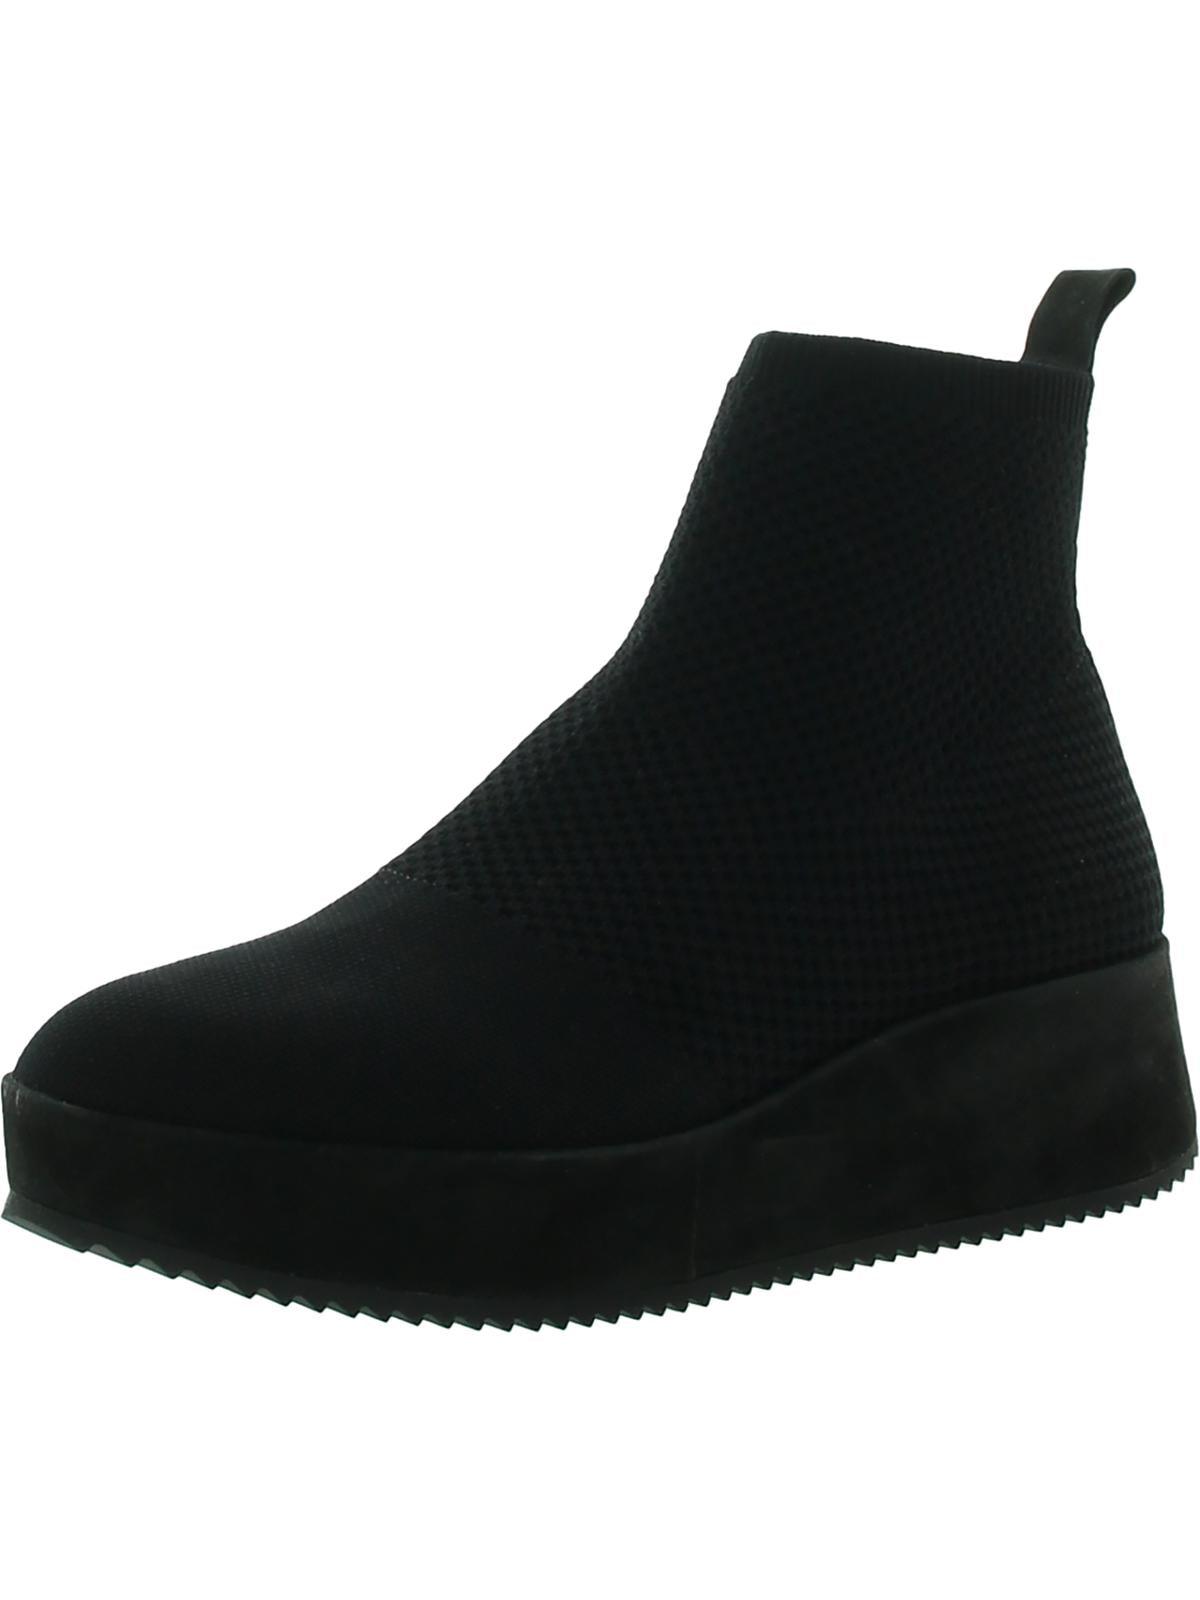 Eileen Fisher Knit Fabric Wedge Heel Chelsea Boots in Black | Lyst